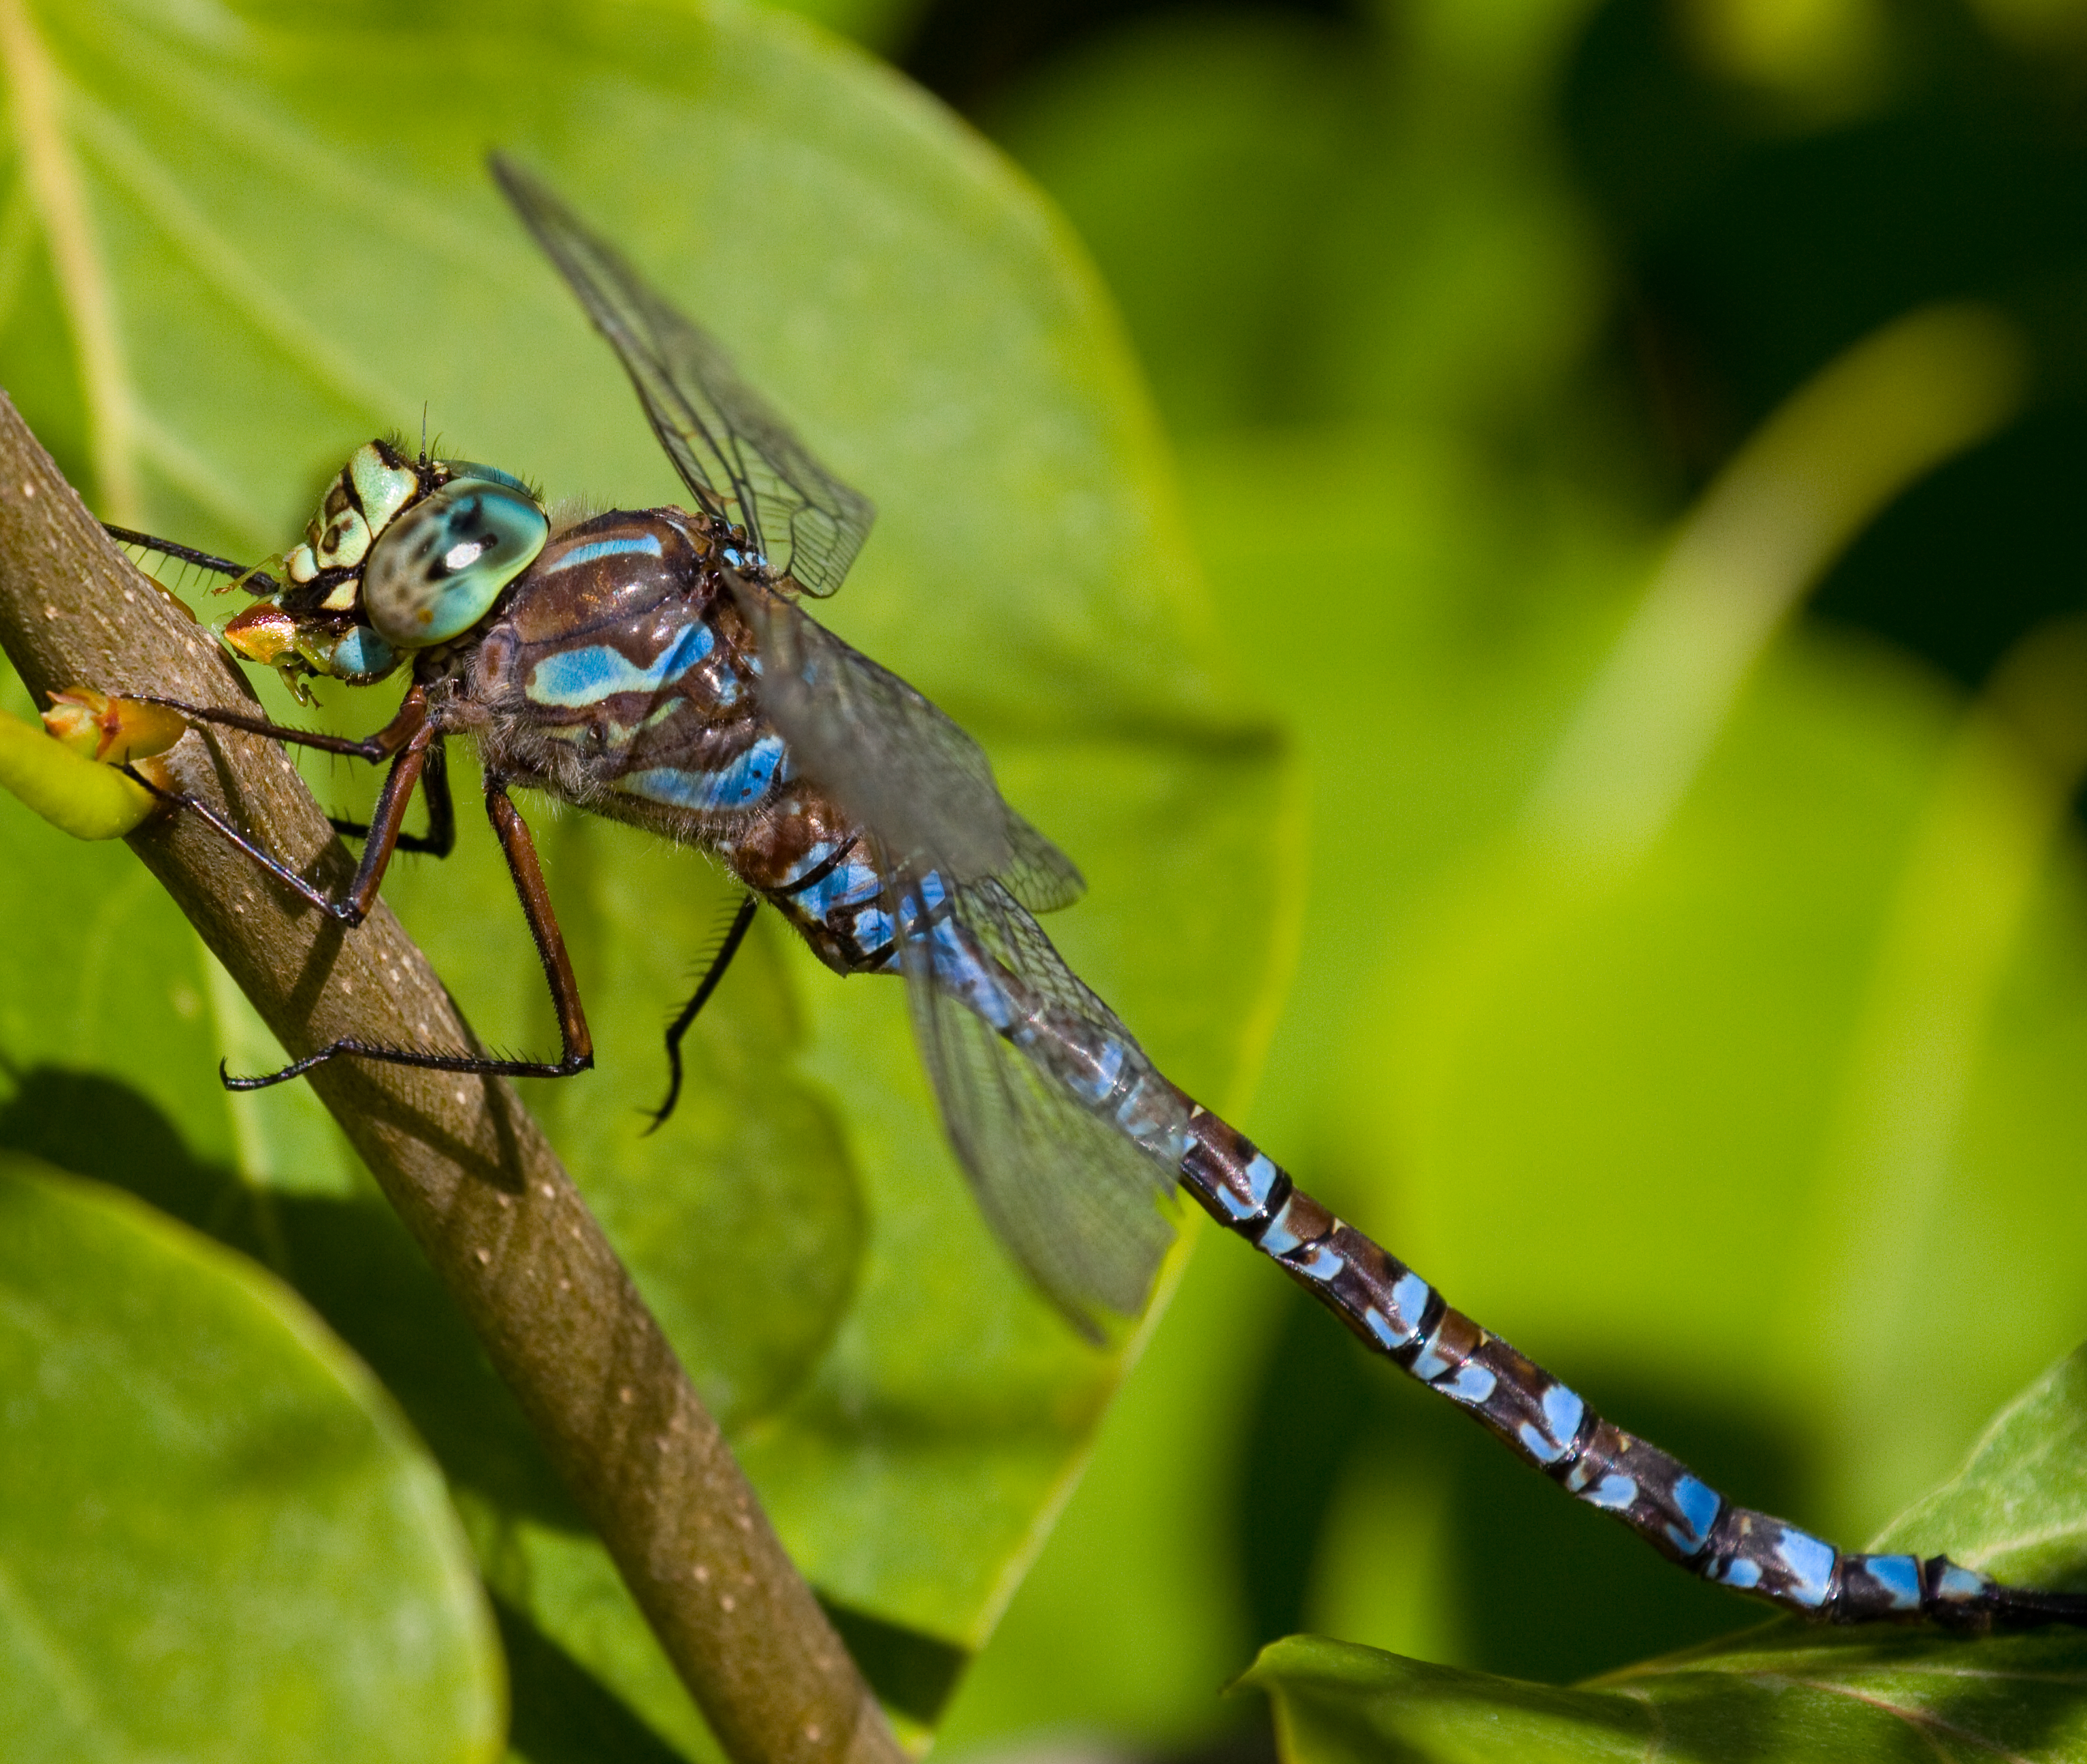 File:Blue Dragonfly 3 (7974369693).jpg - Wikimedia Commons